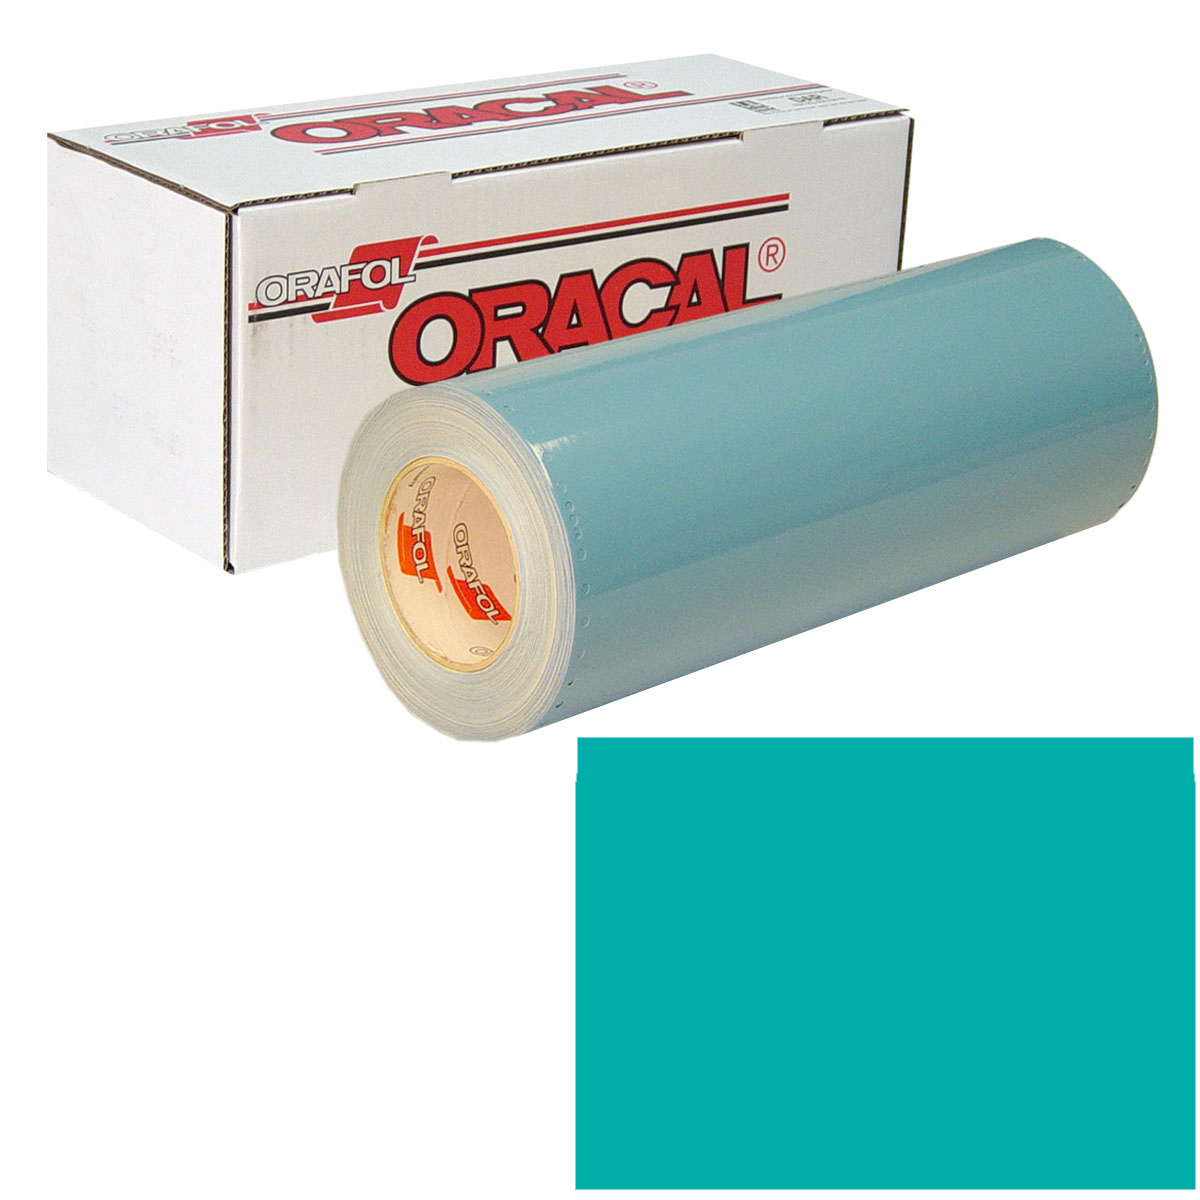 ORACAL 751 Unp 24in X 10yd 054 Turquoise